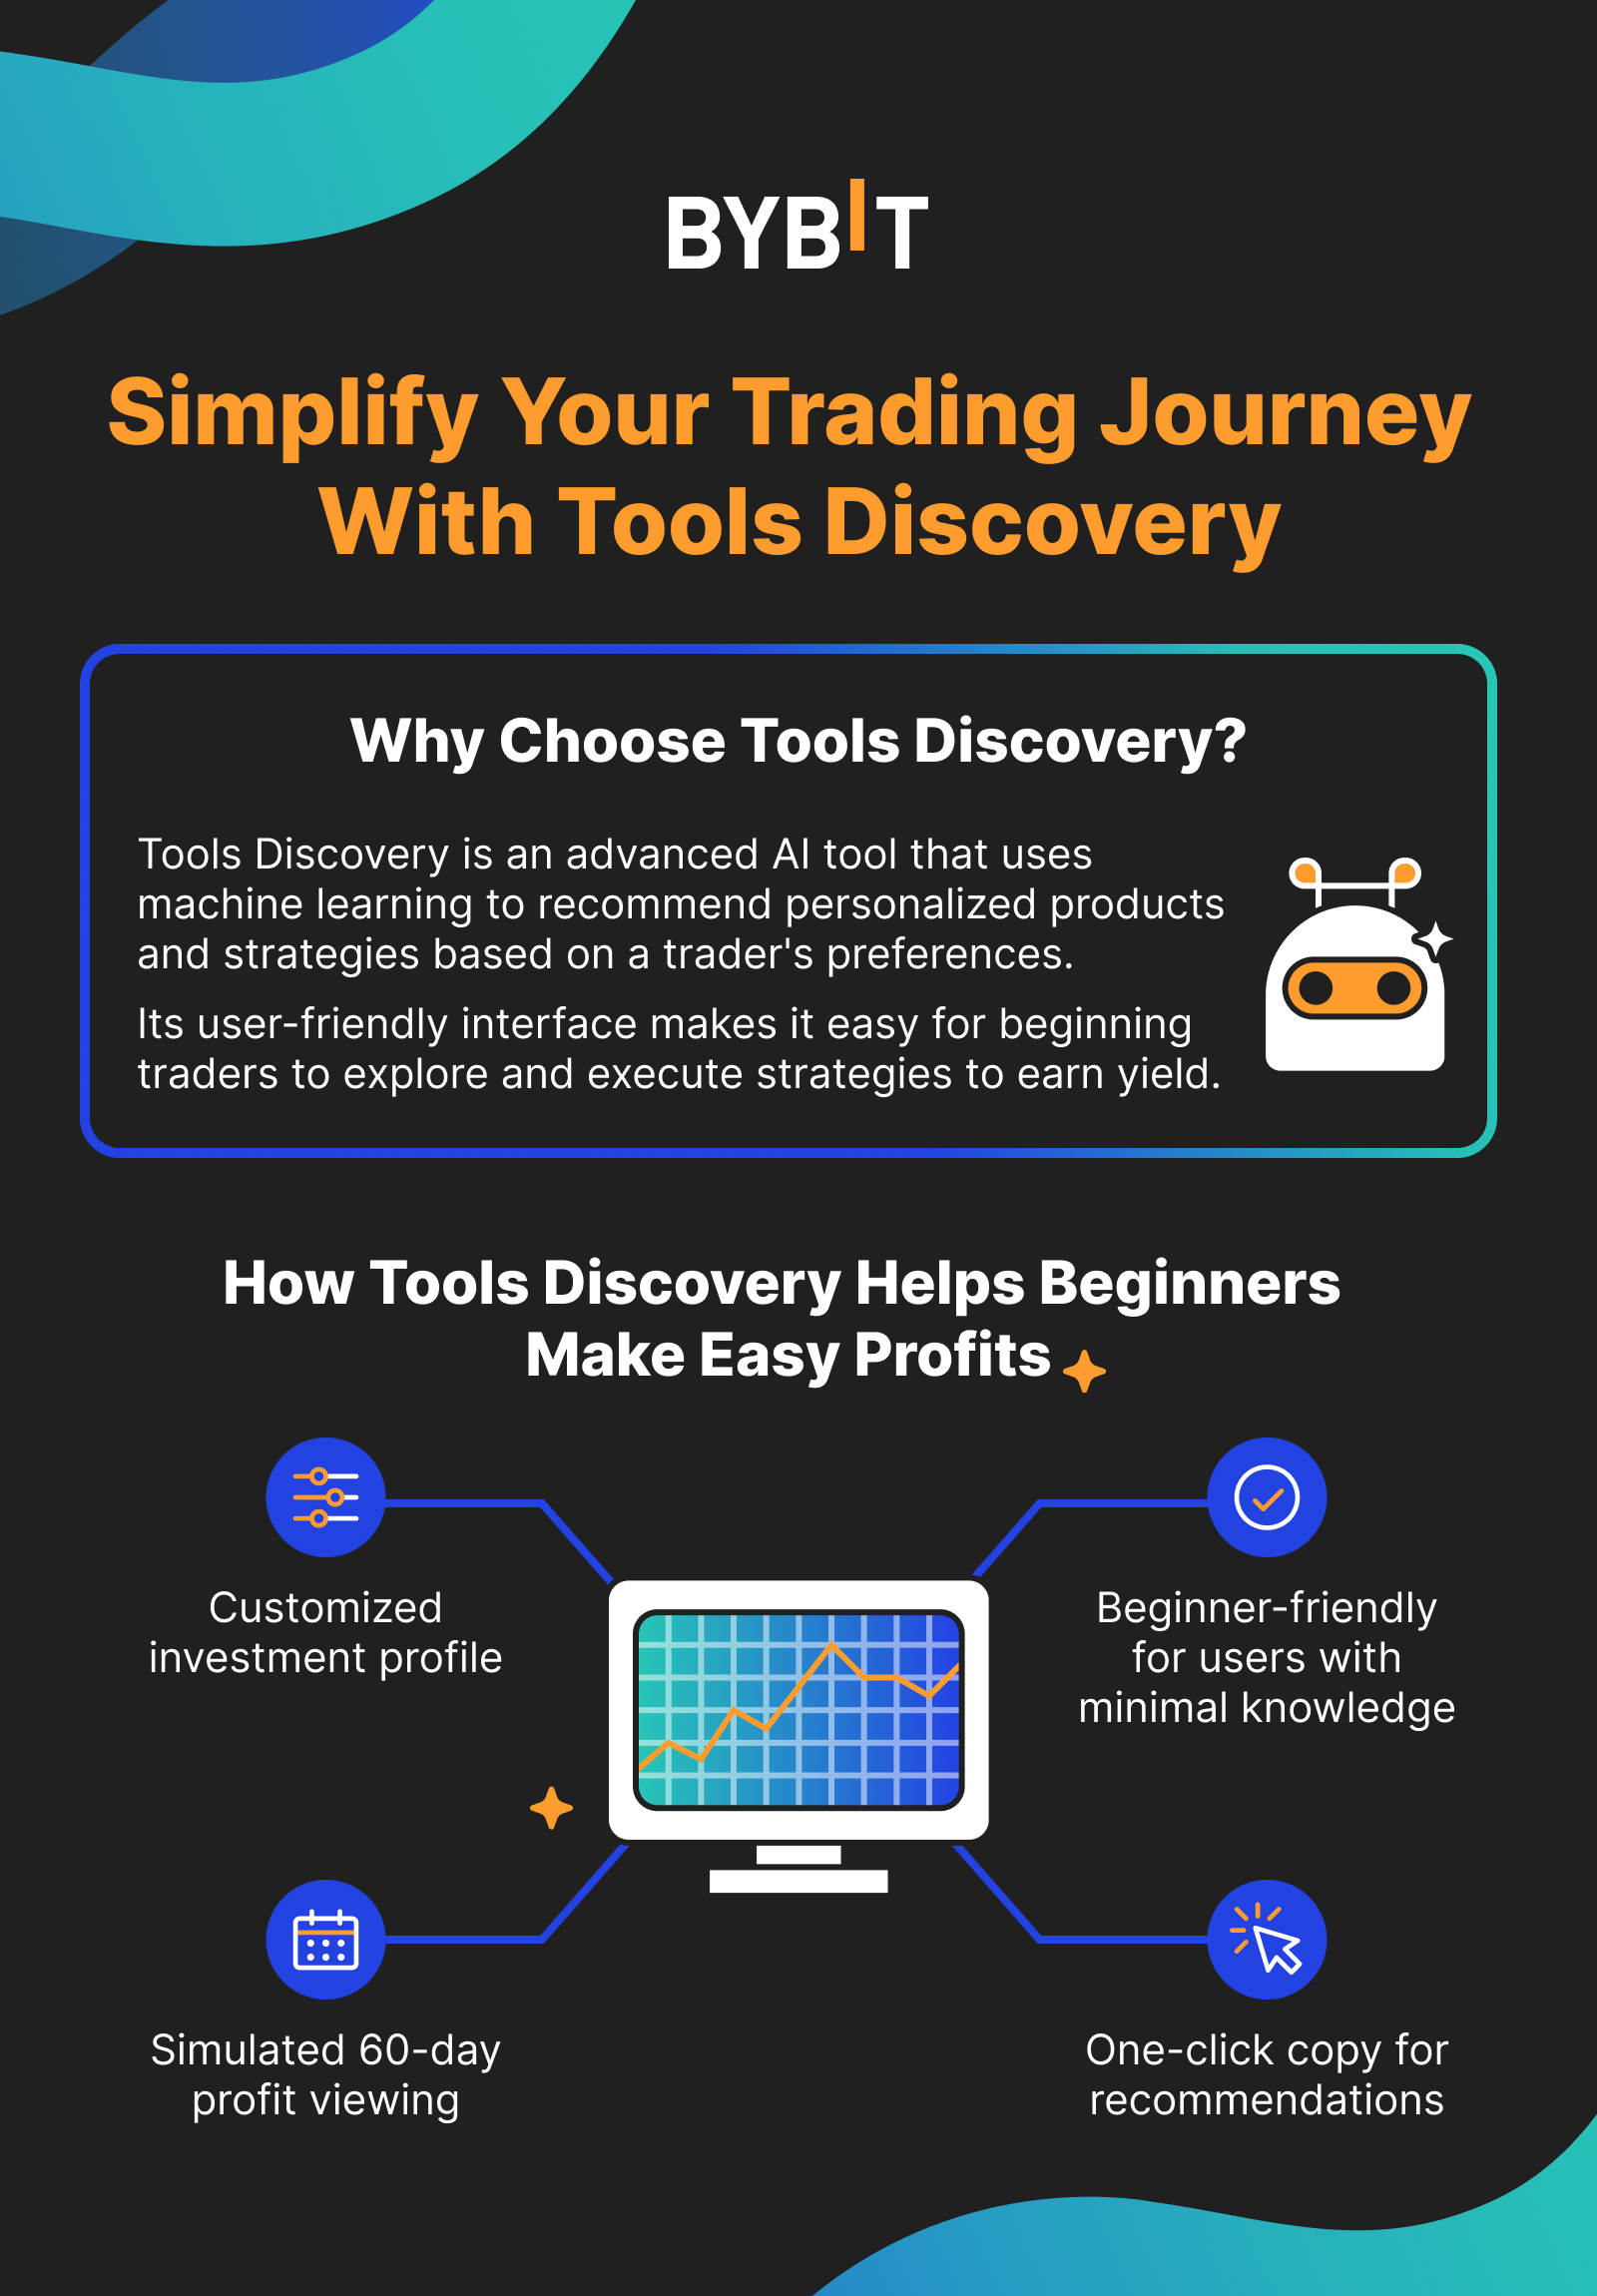 Why Choose Tools Discovery and How Tools Discovery Helps Beginners Make Easy Profits